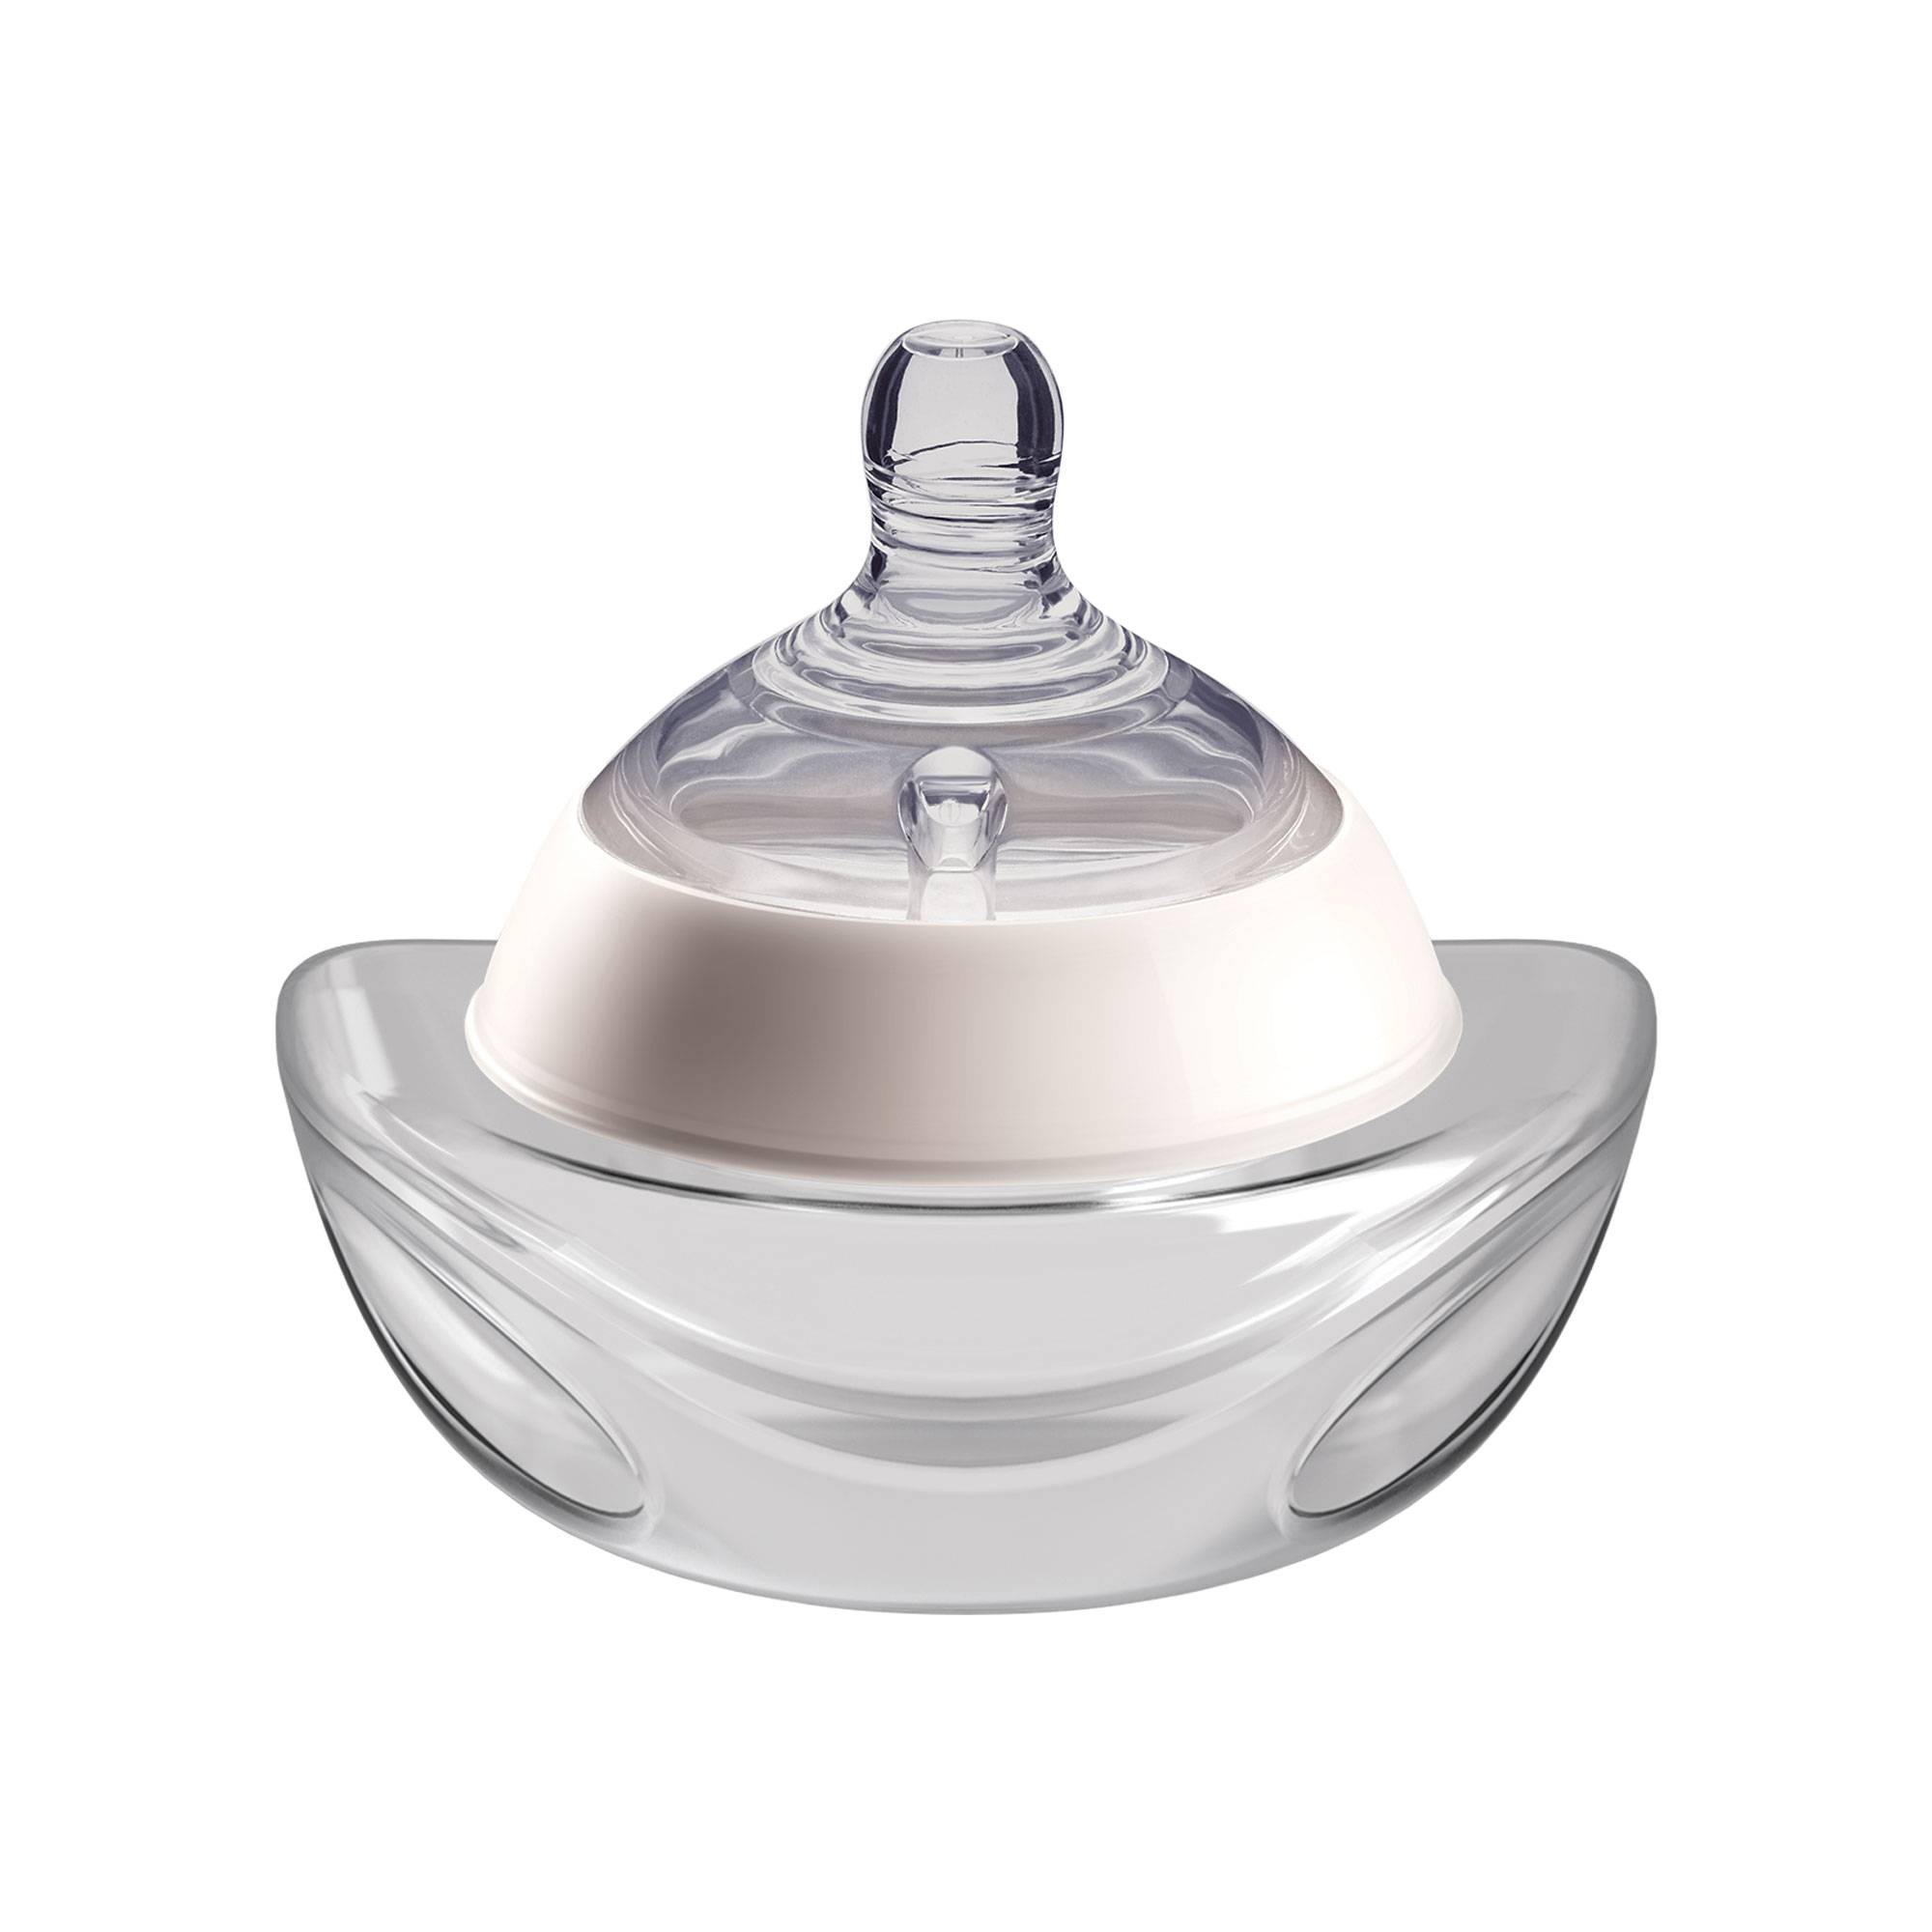 Tommee Tippee Made For Me In Bra Wearbale Breast Pump Single  تومي تيبي  مضخة ثدي كهربائية – Beauty Box